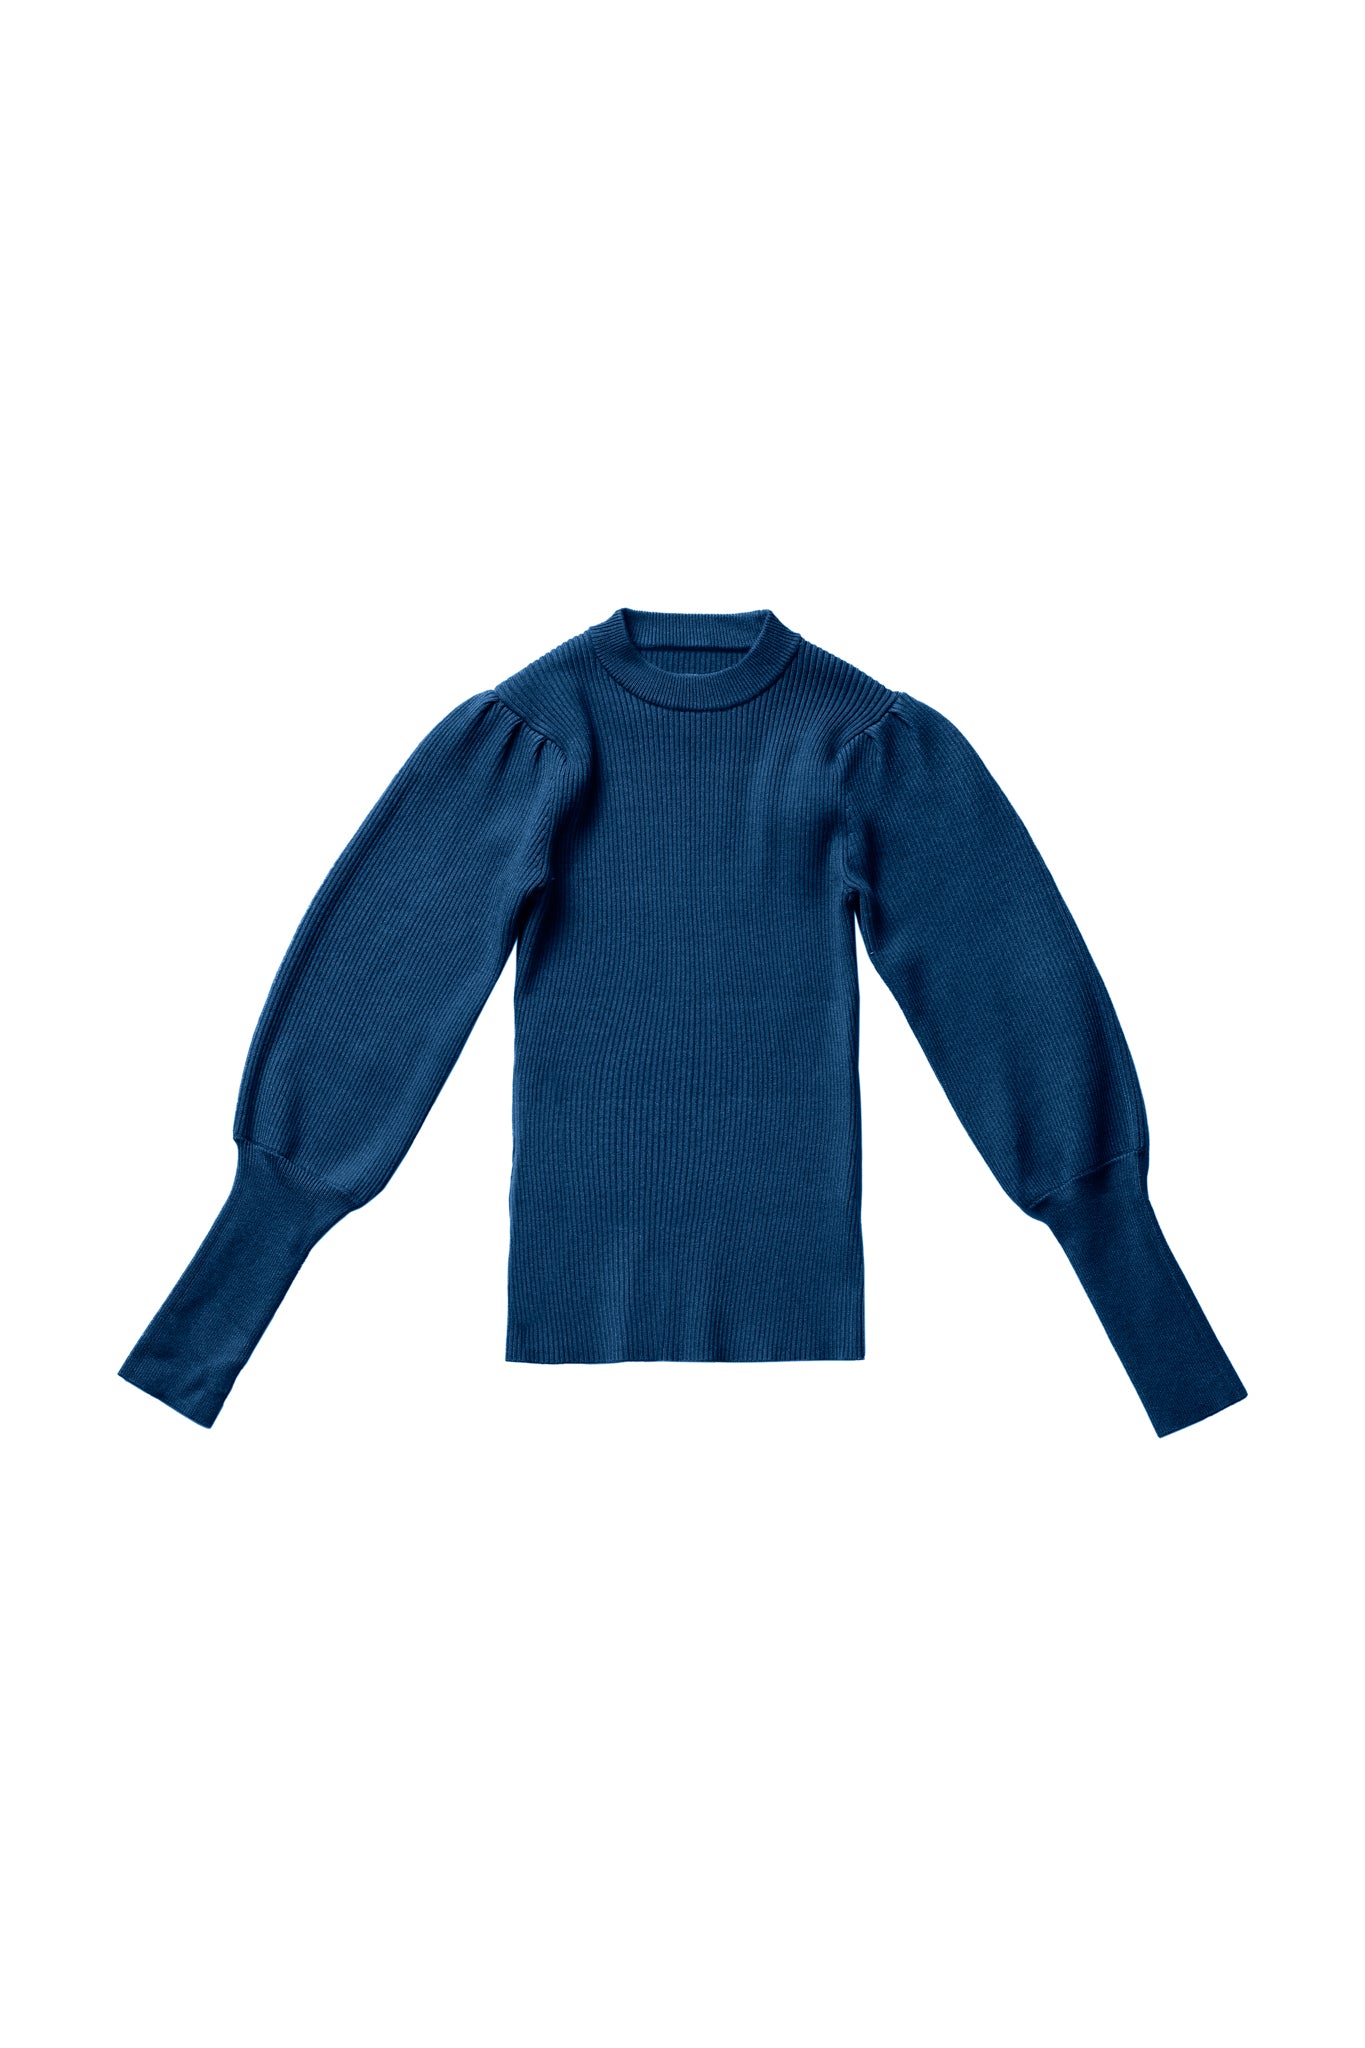 Puff Sleeves Sweater in Teal #8140ZK